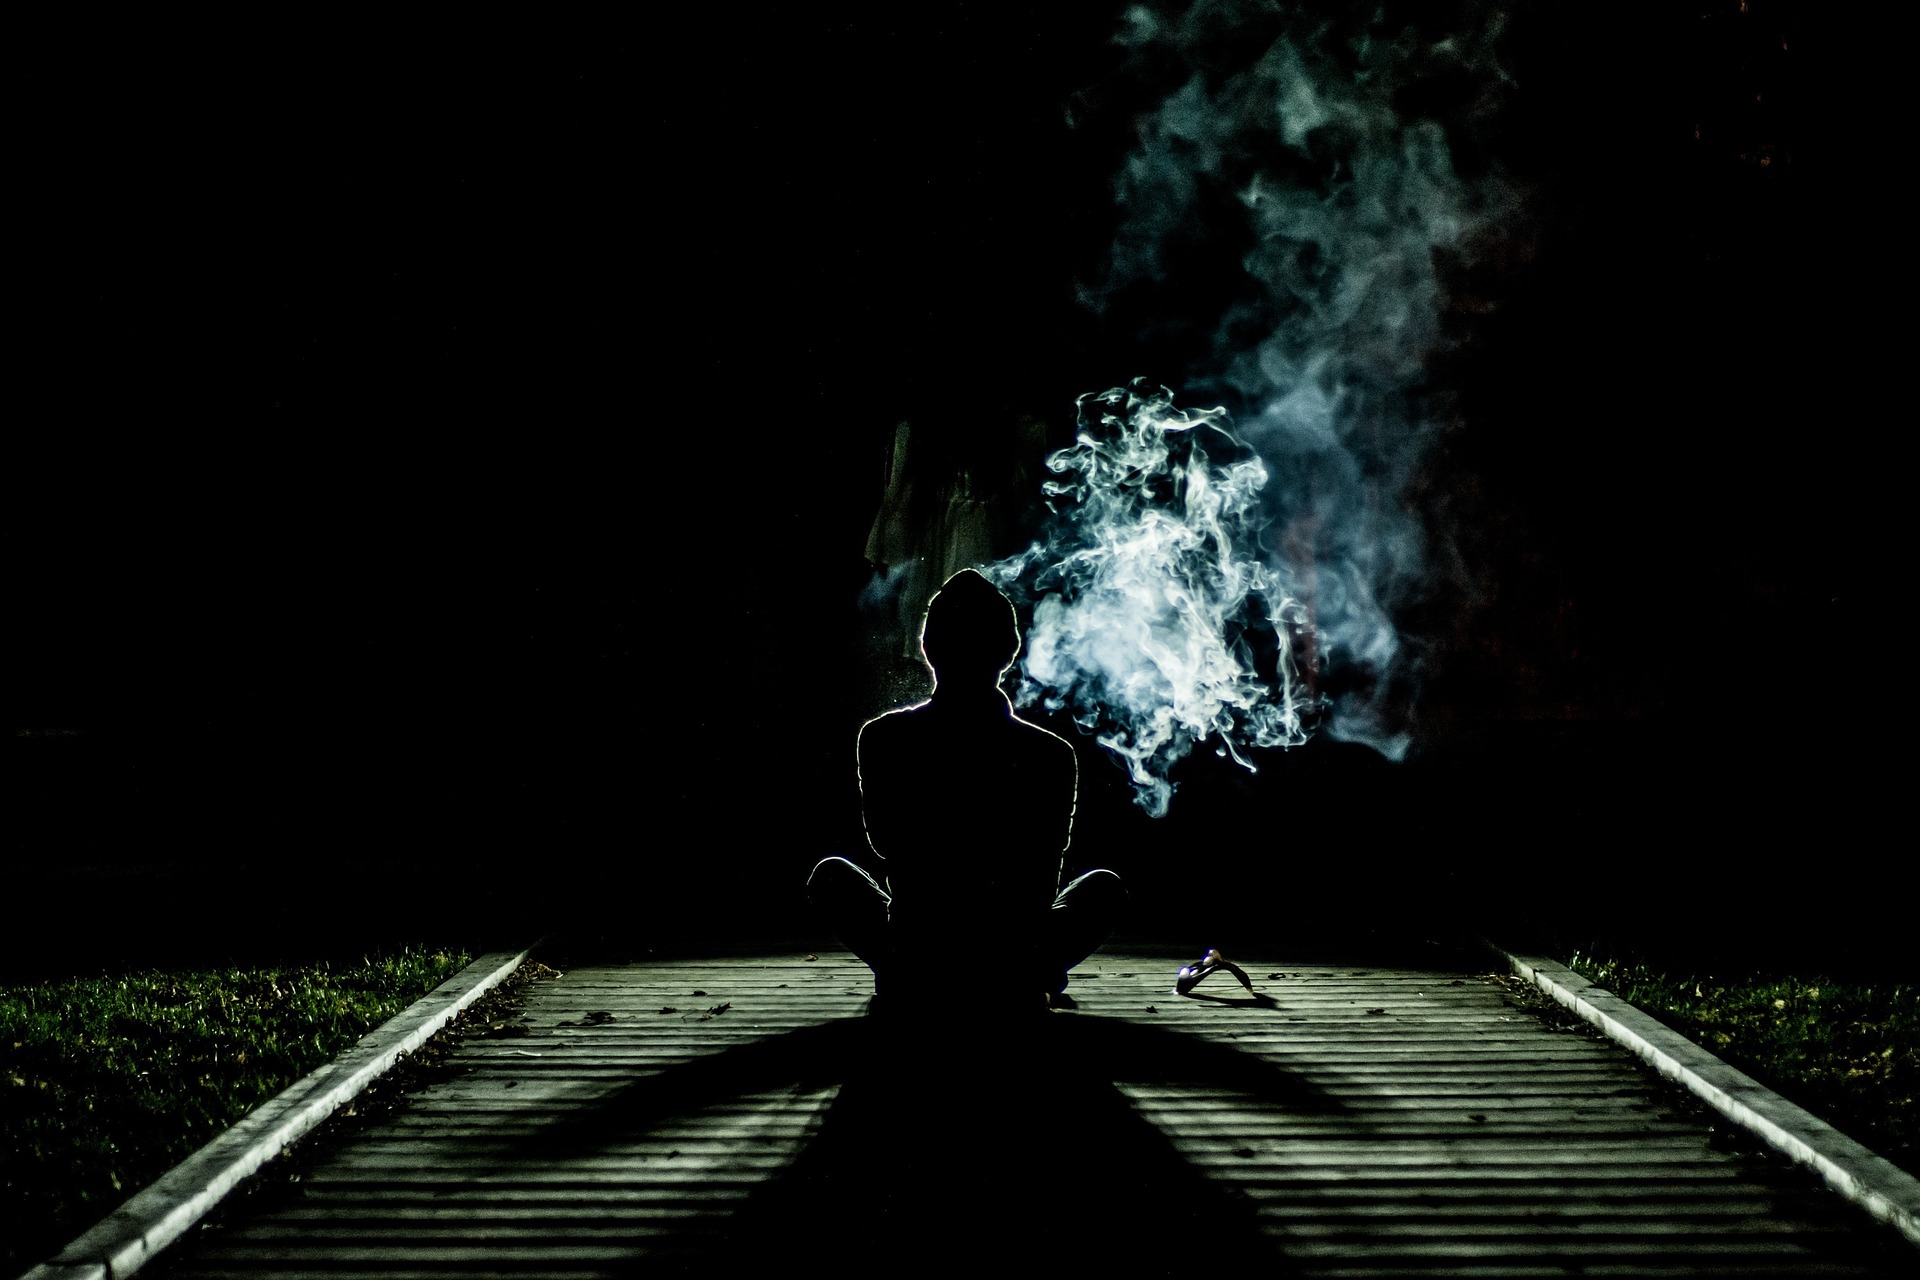 A person sits cross-legged on a wooden dock at night, silhouetted against the dark, with smoke from a controlled substance rising artistically into the air around them. A subtle greenish light